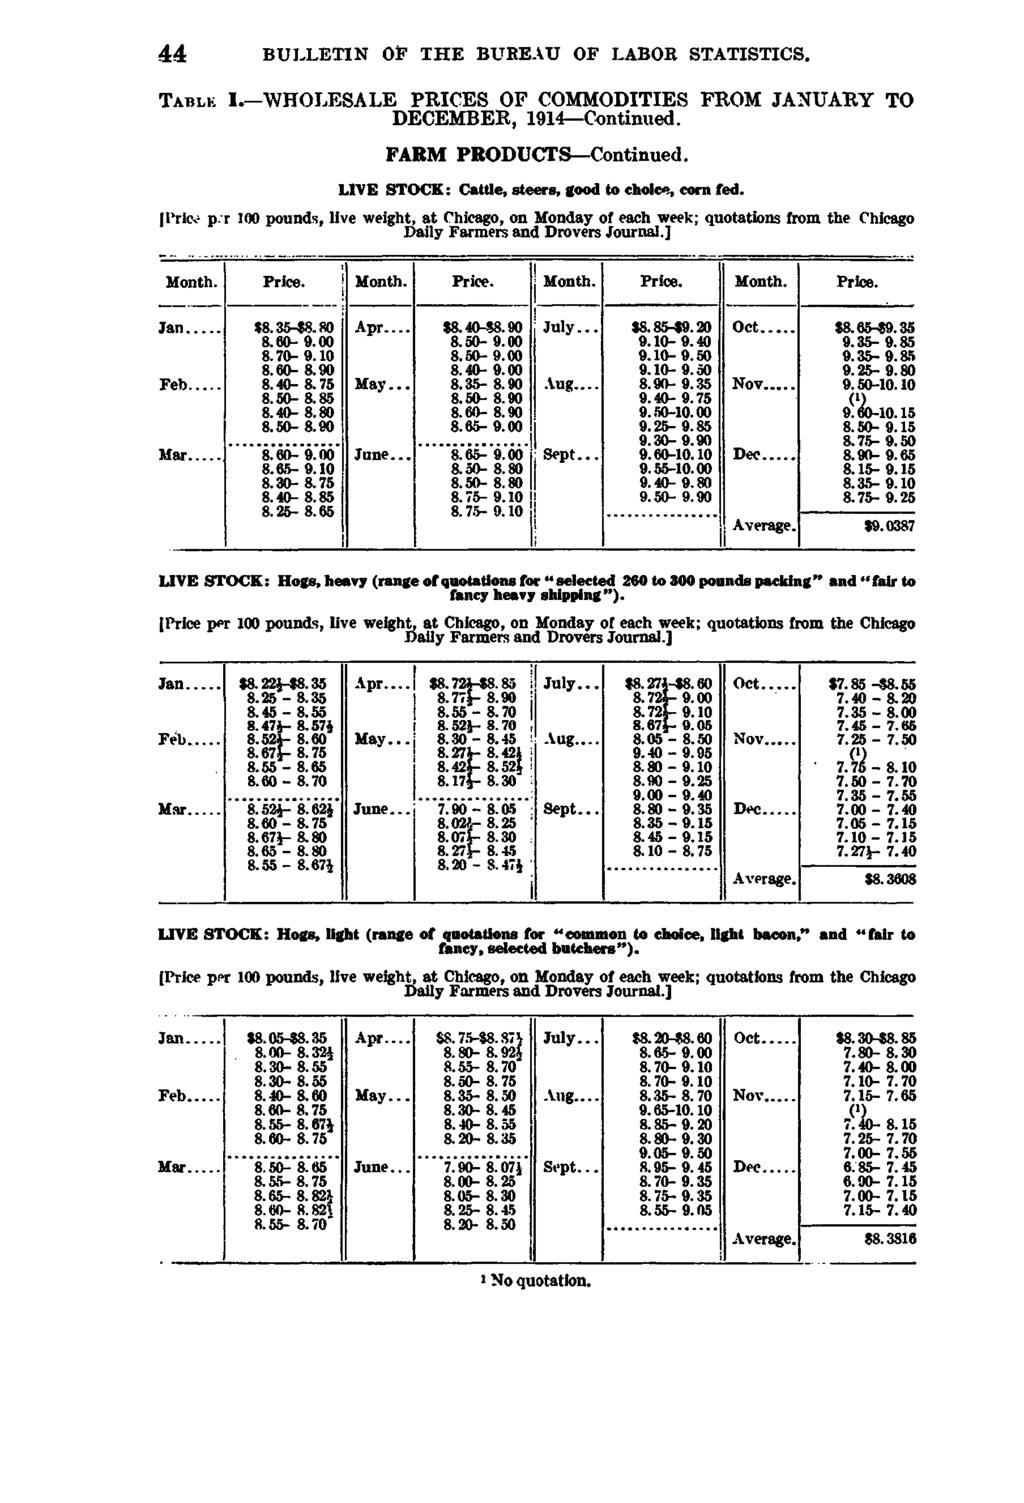 44 BULLETIN OF THE BUREAU OF LABOR STATISTICS. T a b lk I. WHOLESALE PRICES OF COMMODITIES FROM JANUARY TO DECEMBER, 1914 Continued. FARM PRODUCTS Continued.